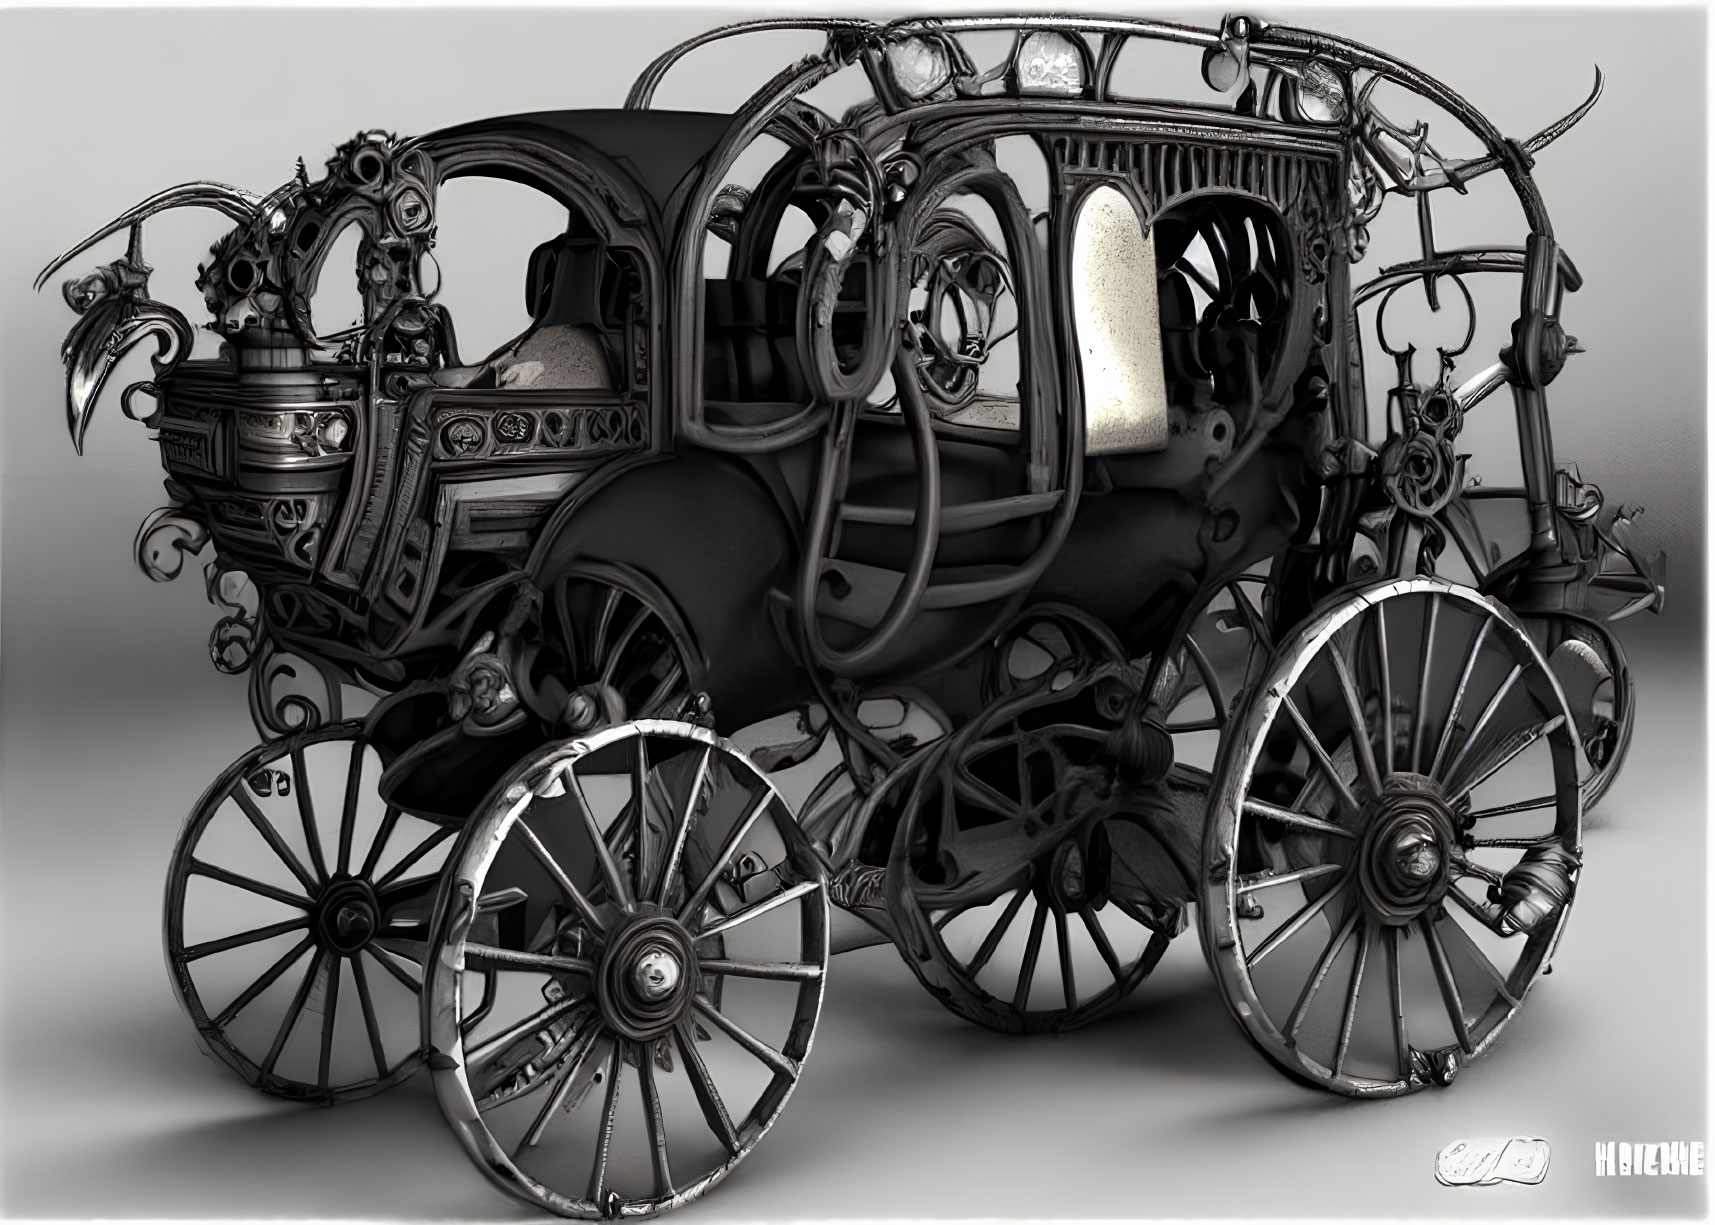 Ornate Black Carriage with Victorian & Steampunk Design